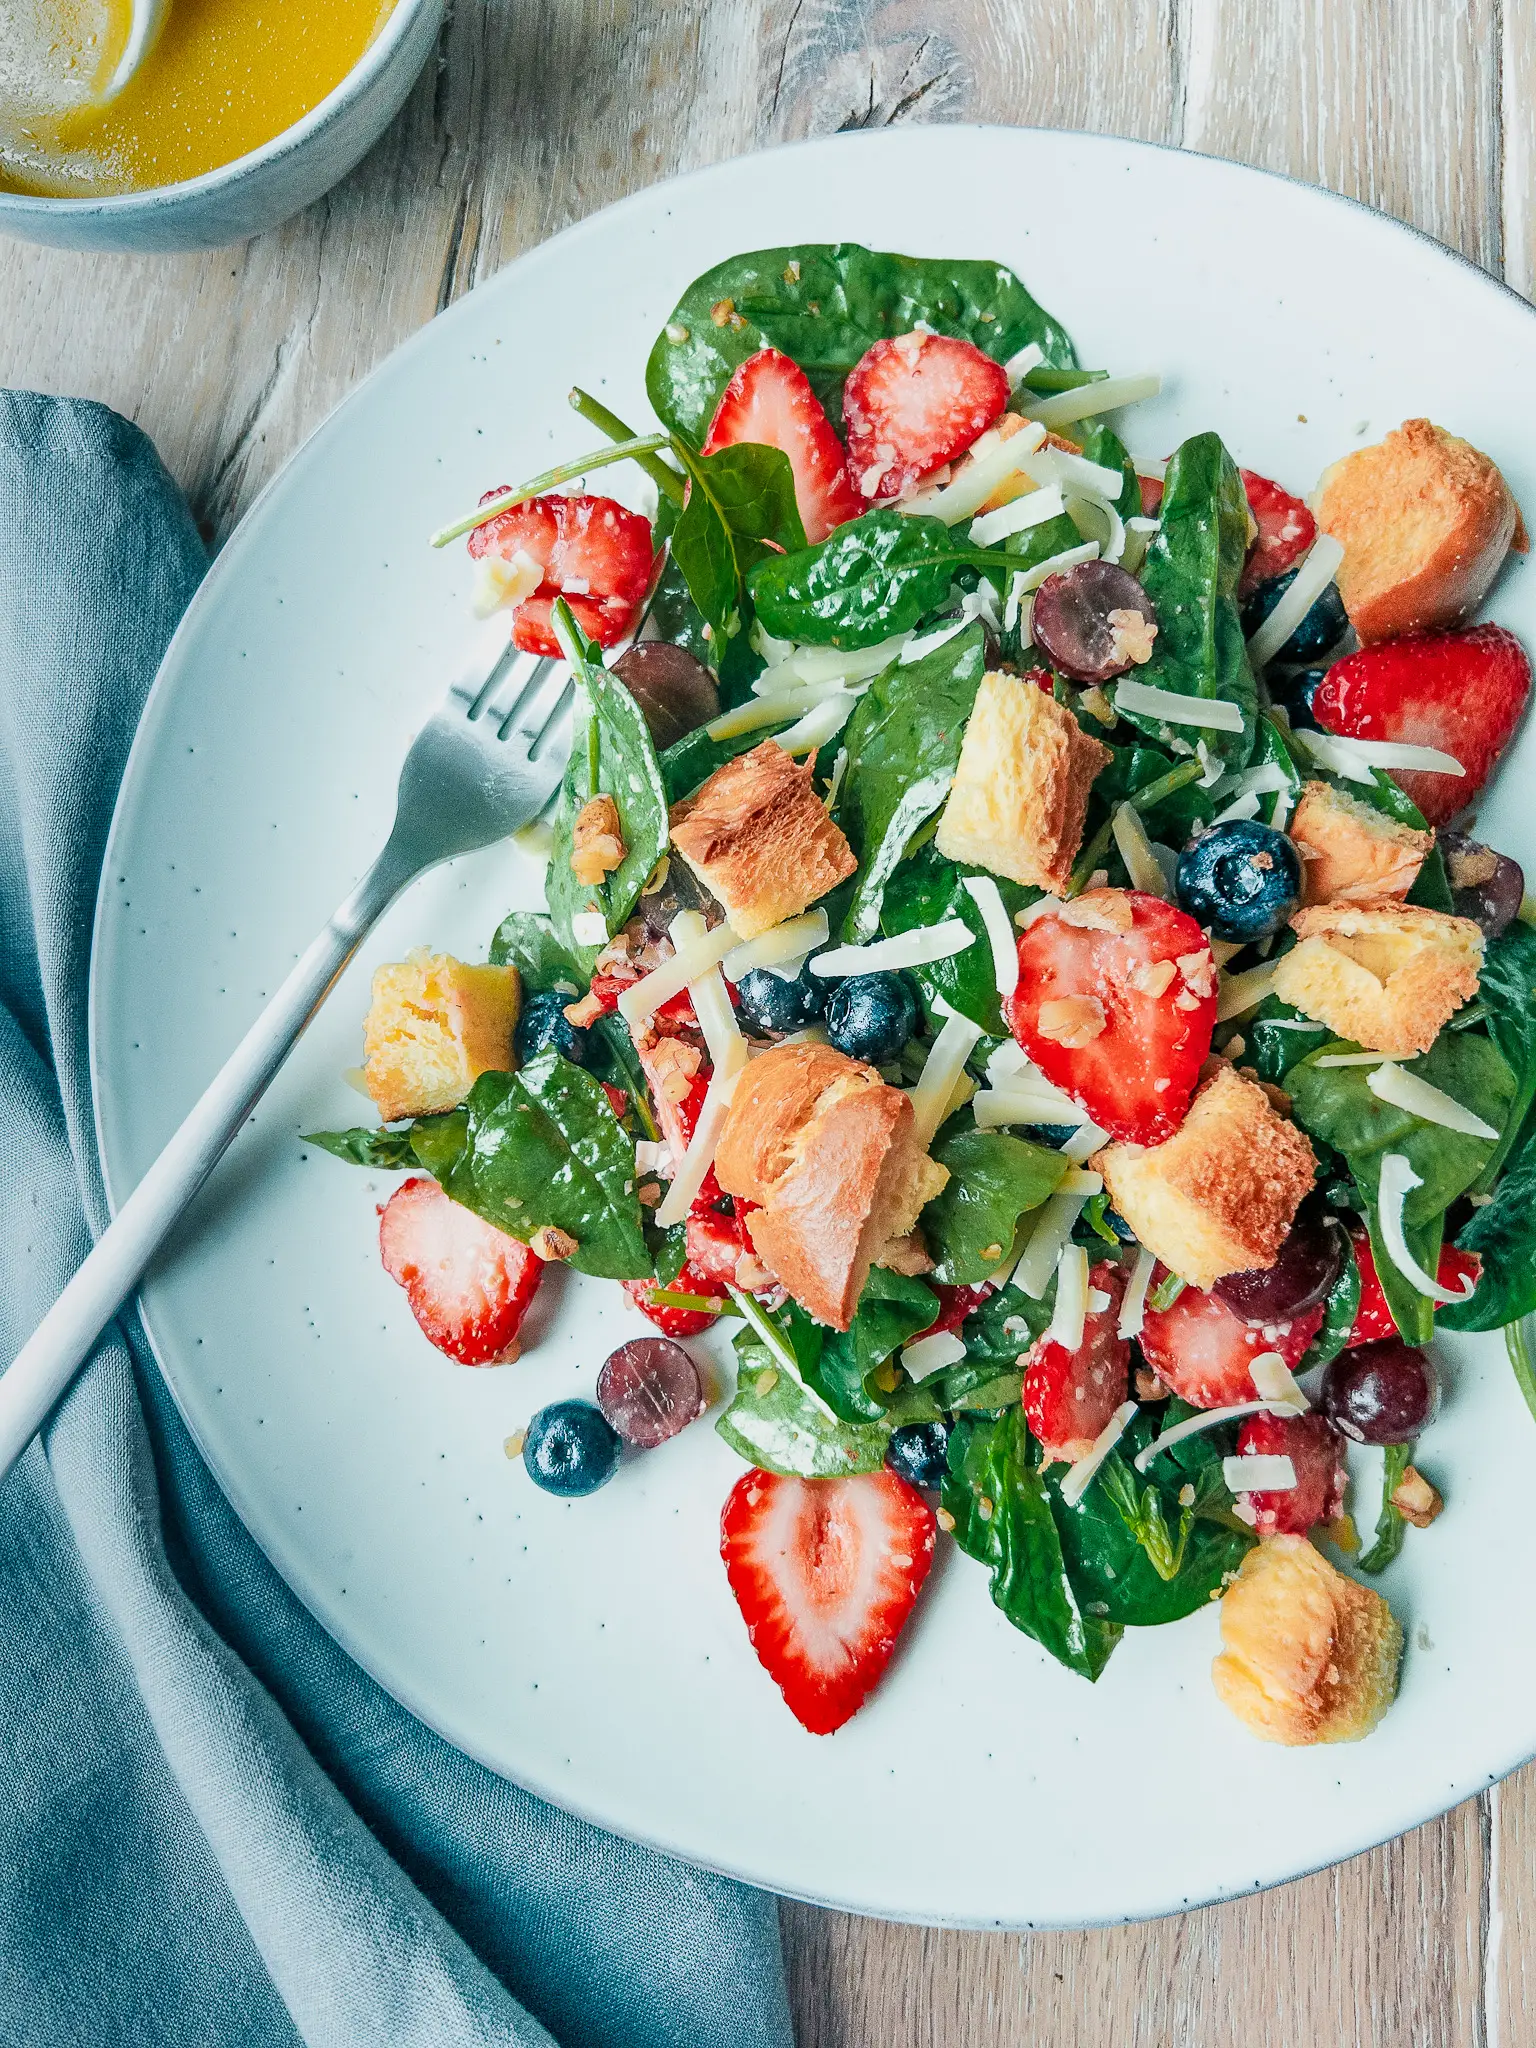 Spinach and Fruit Salad - family Meals 3